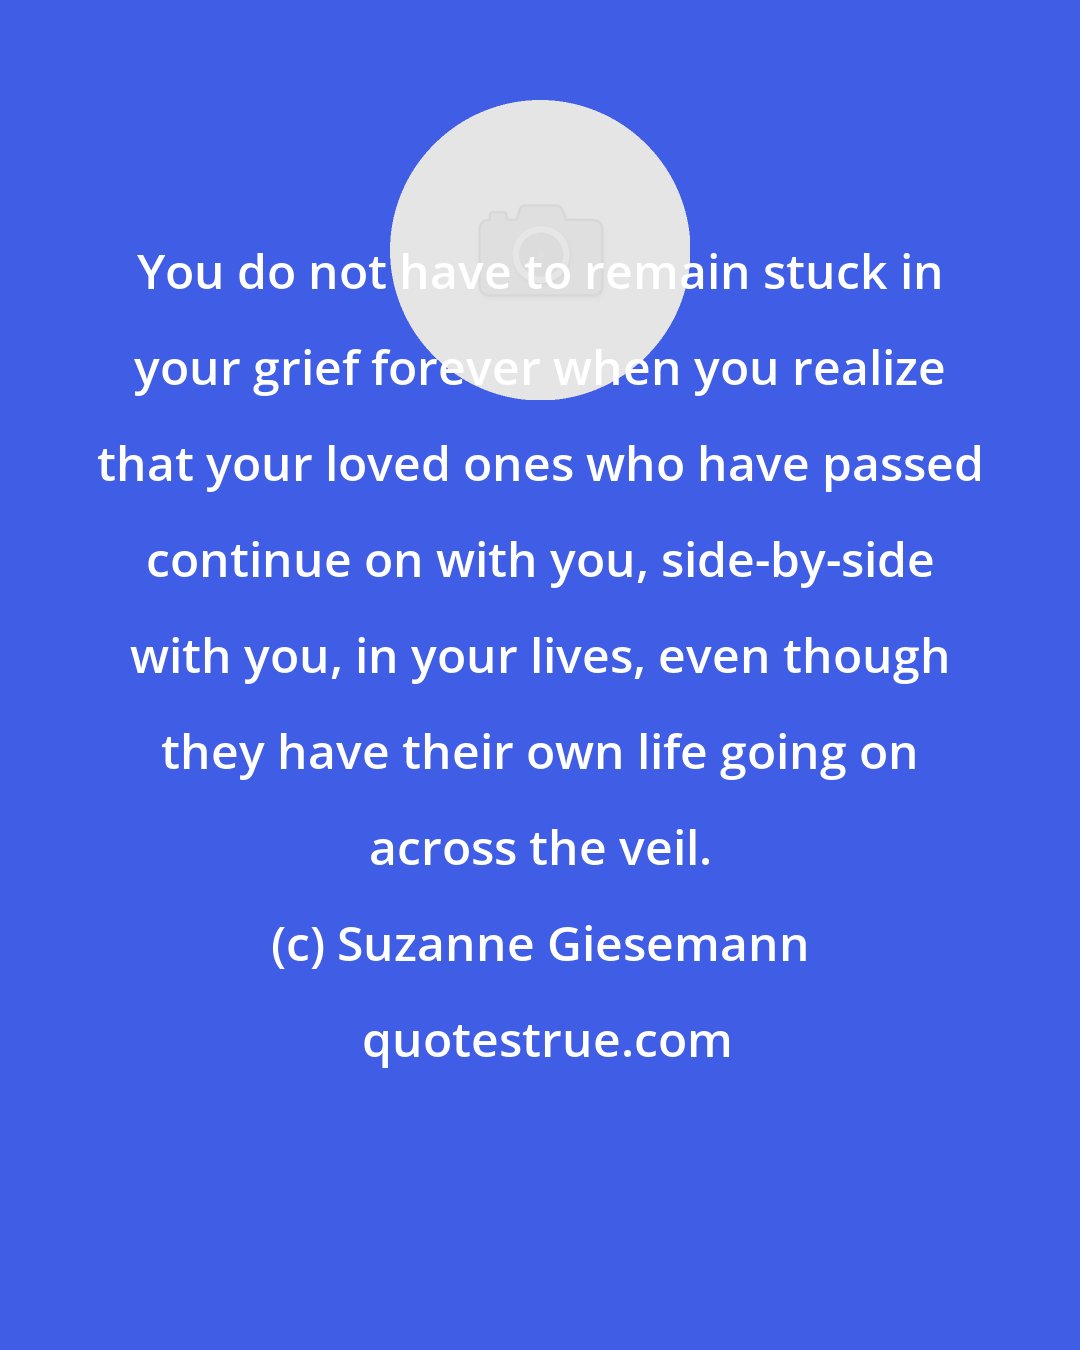 Suzanne Giesemann: You do not have to remain stuck in your grief forever when you realize that your loved ones who have passed continue on with you, side-by-side with you, in your lives, even though they have their own life going on across the veil.